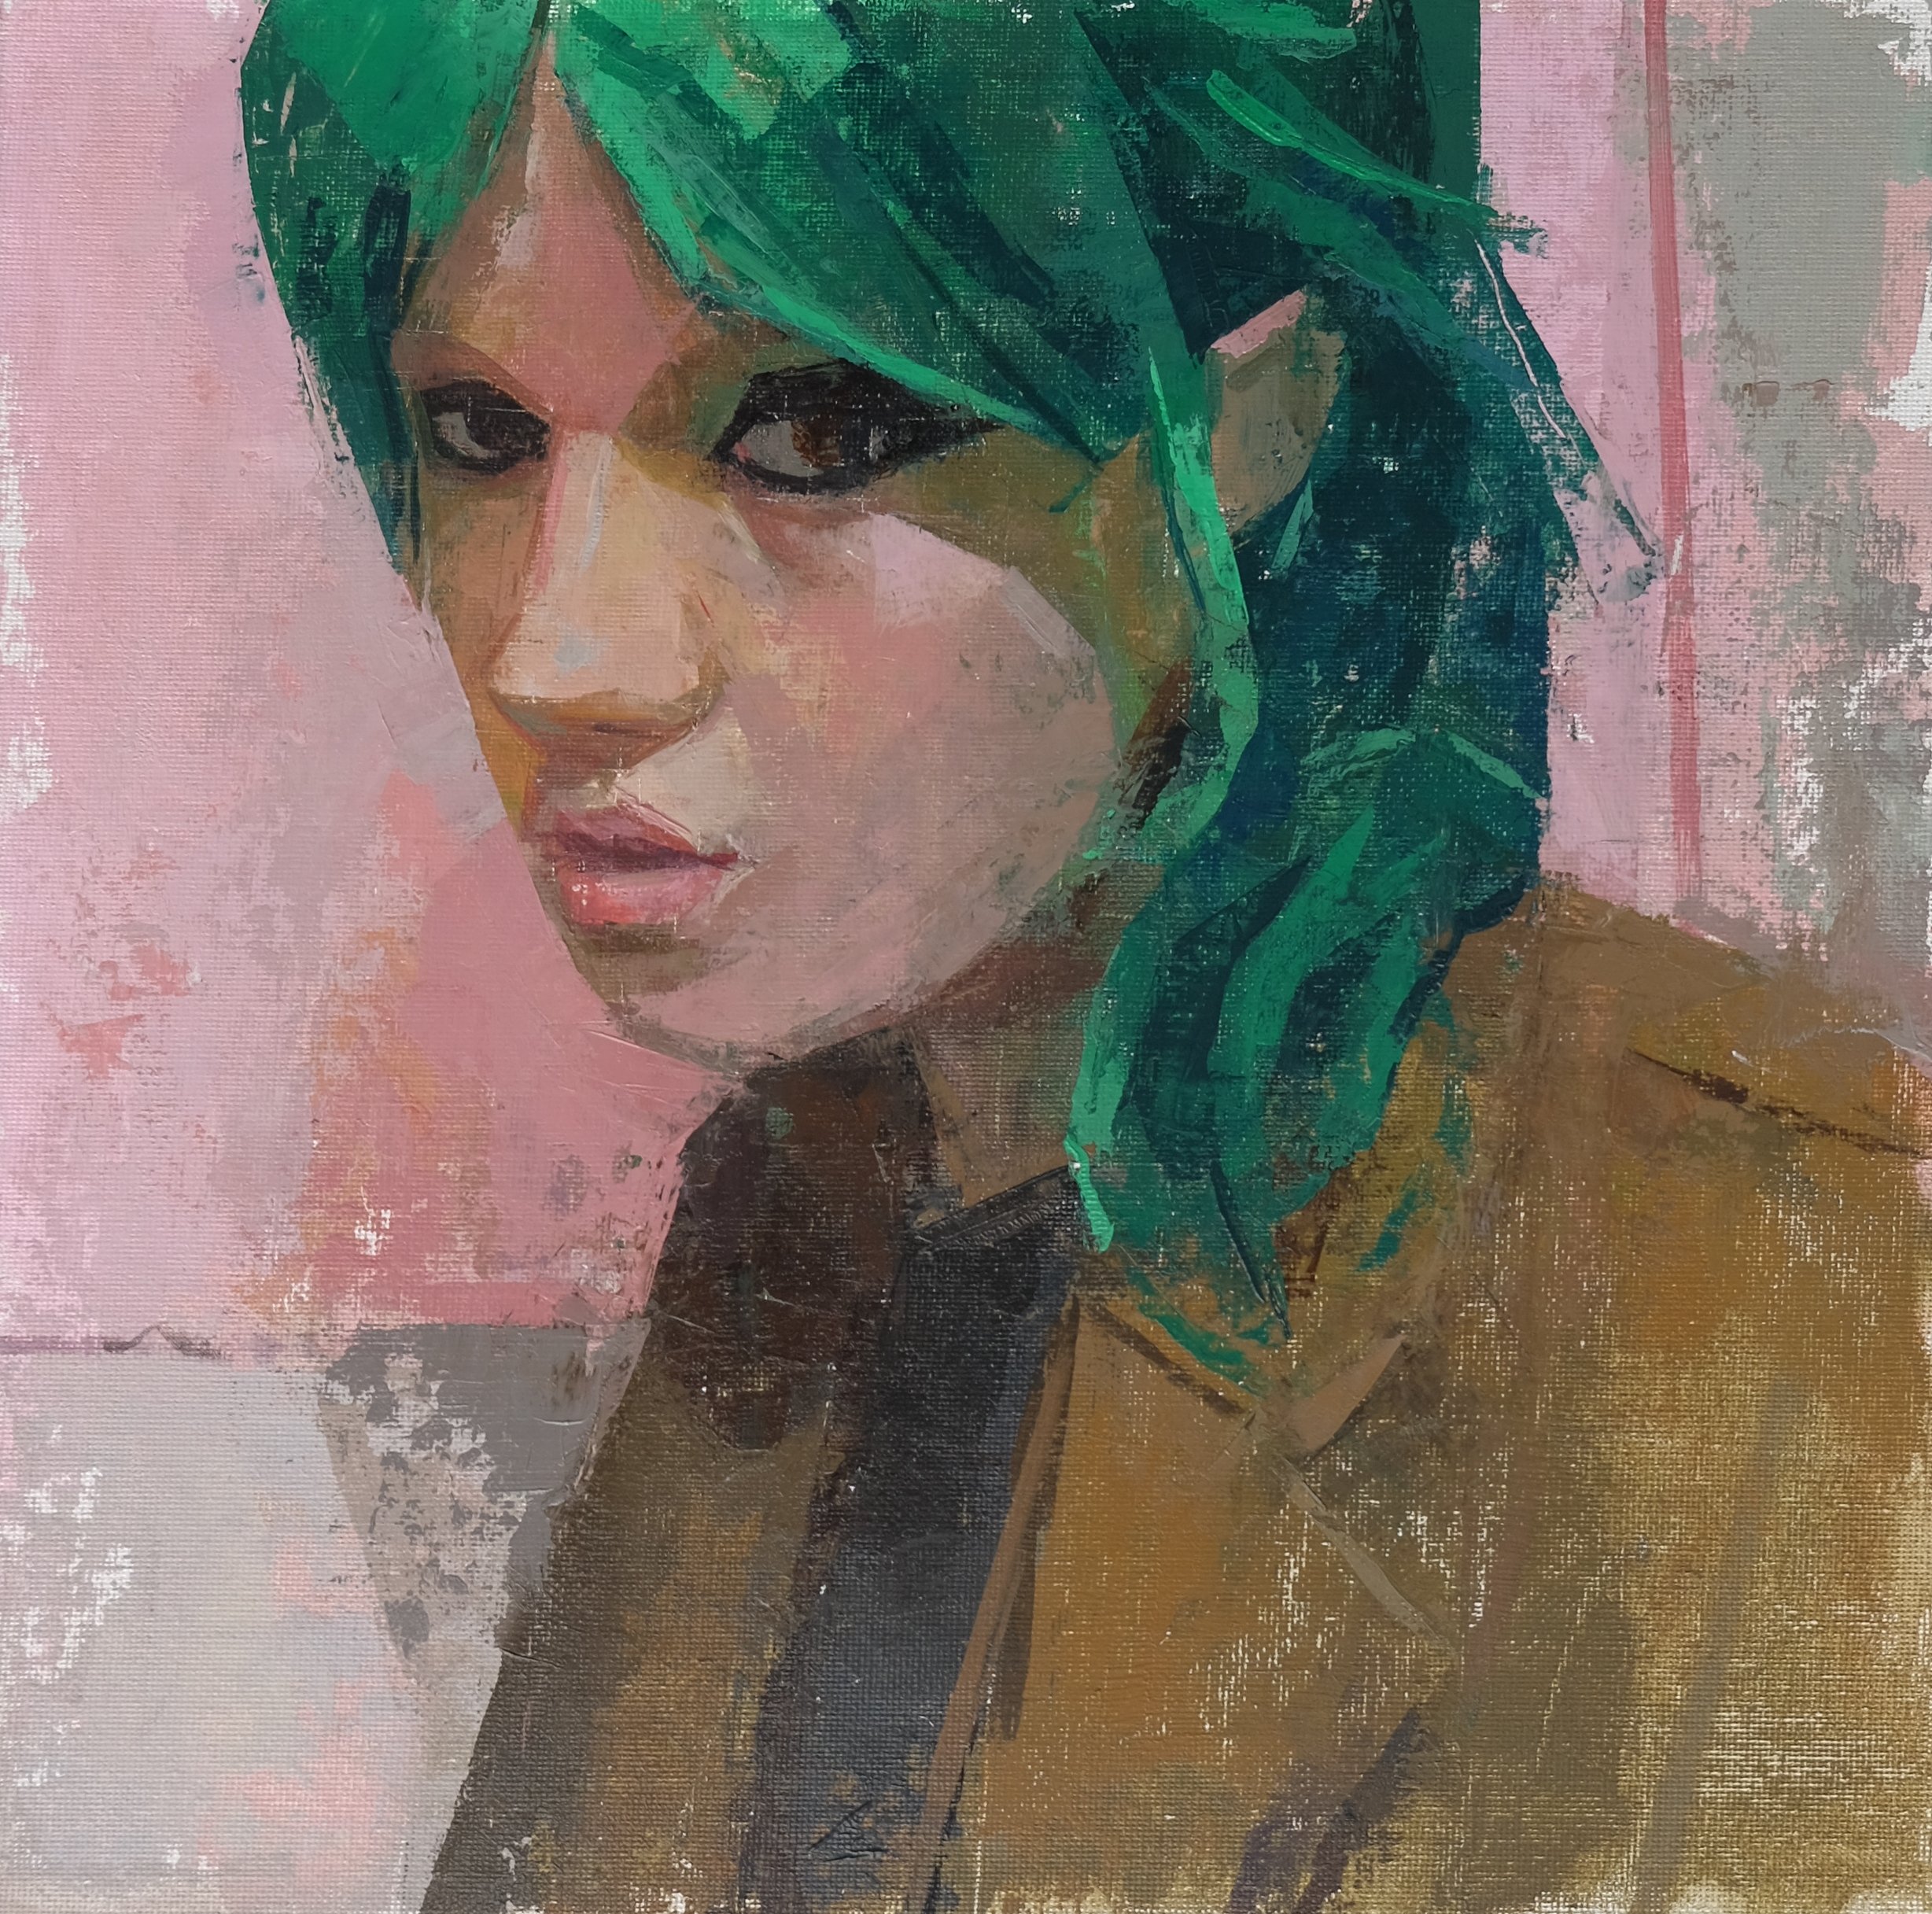 M.L. with Green Hair